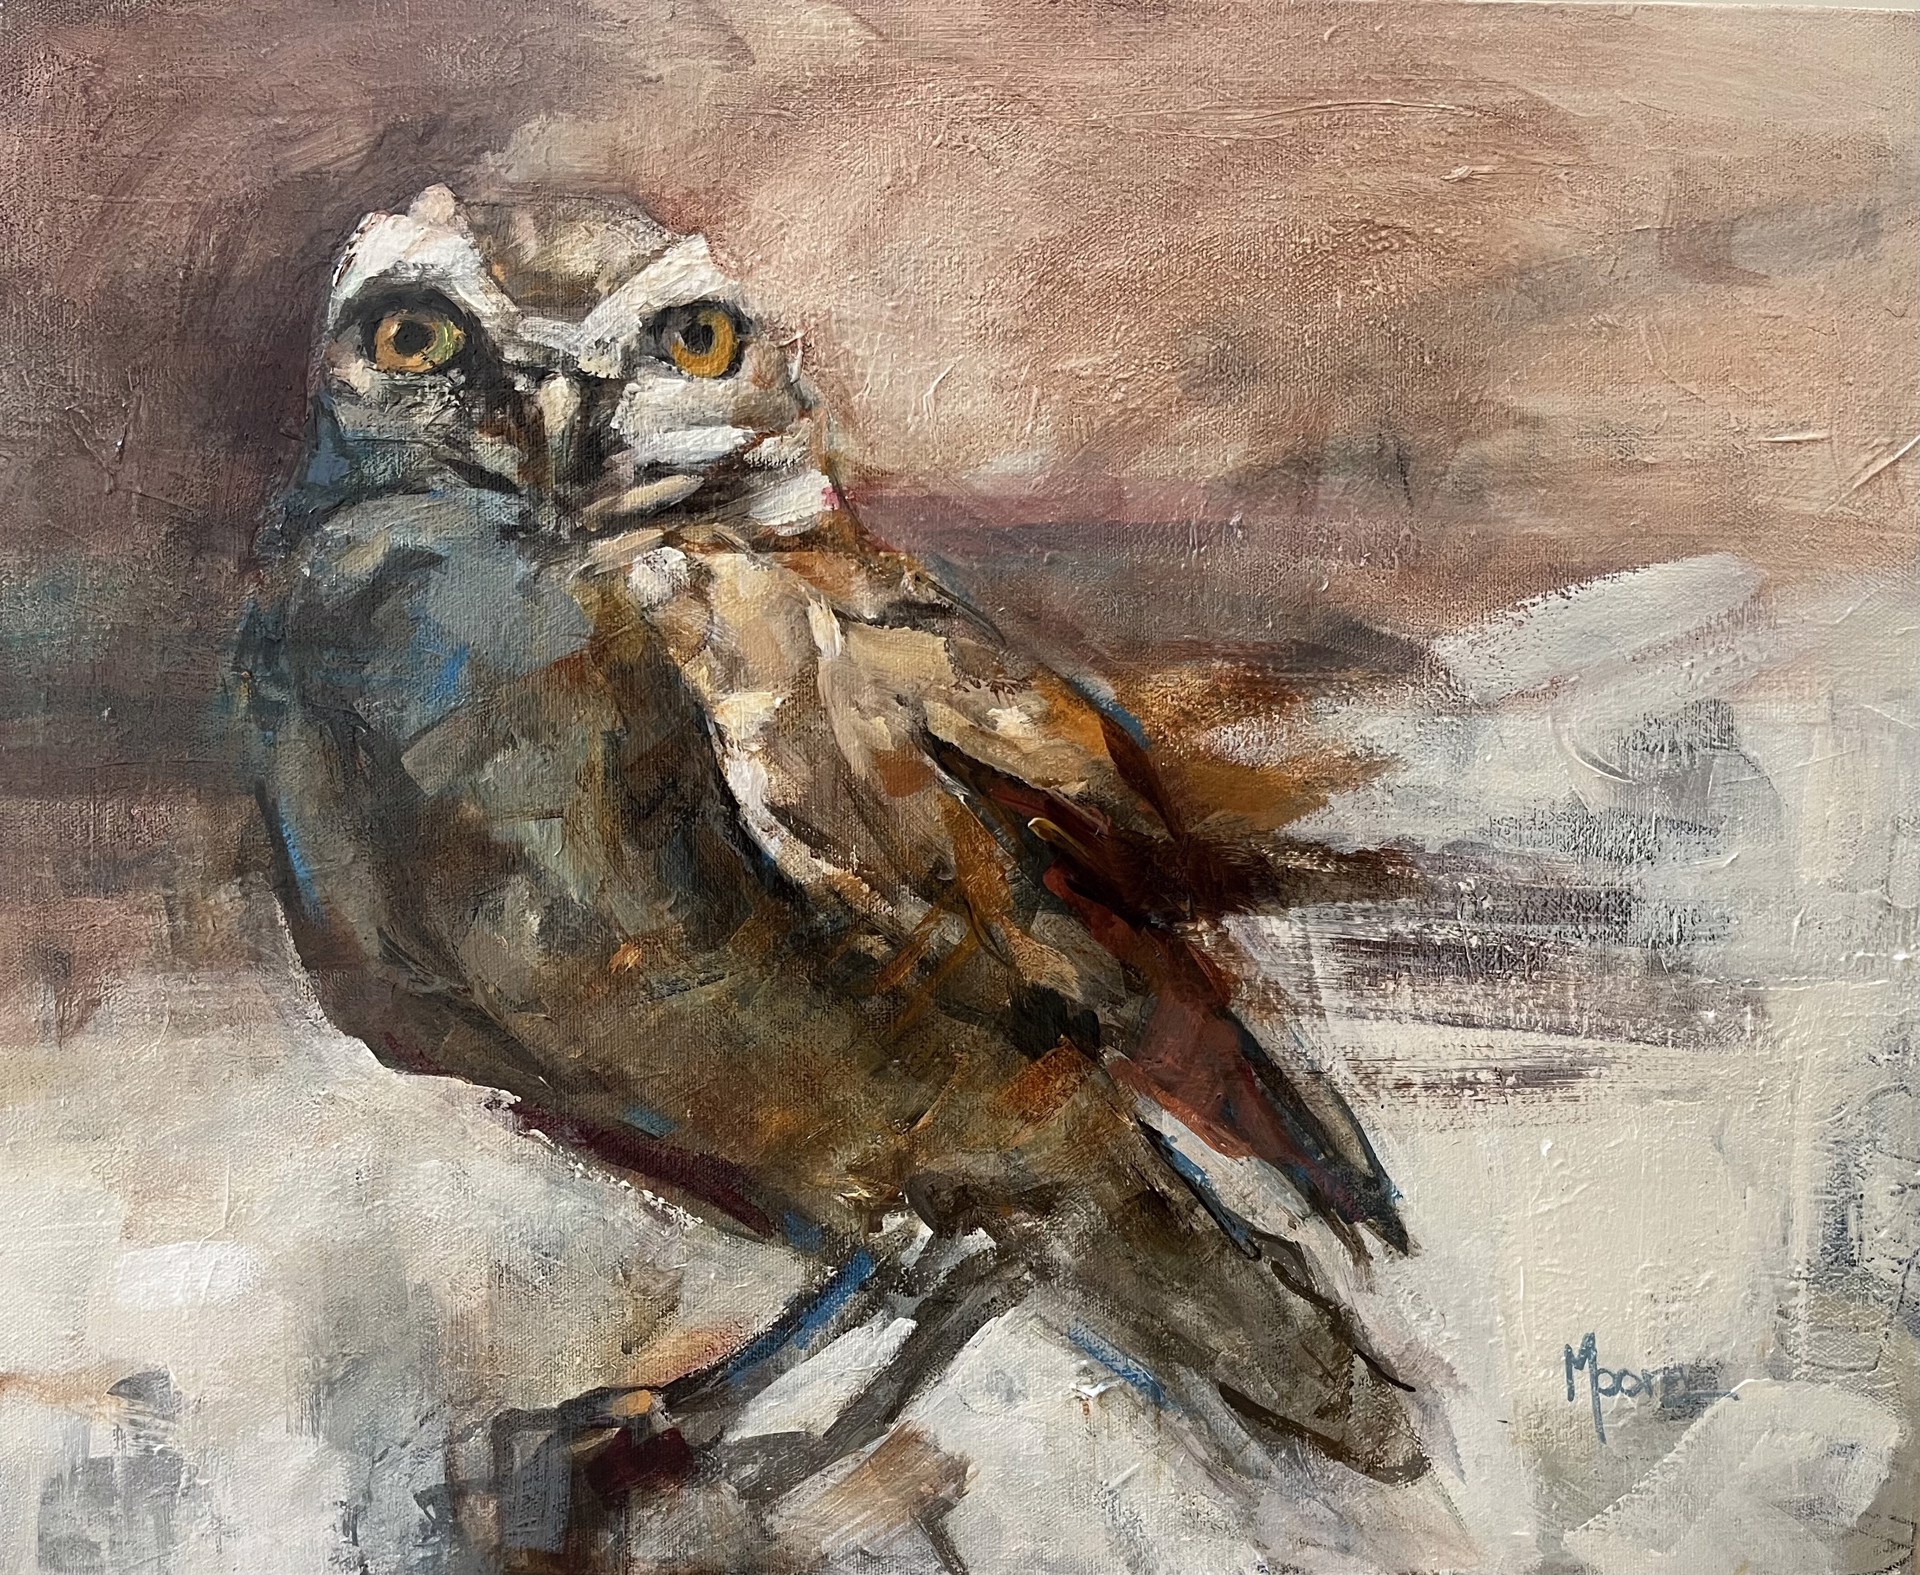 Burrowing Owl 1 by Andrea Moore